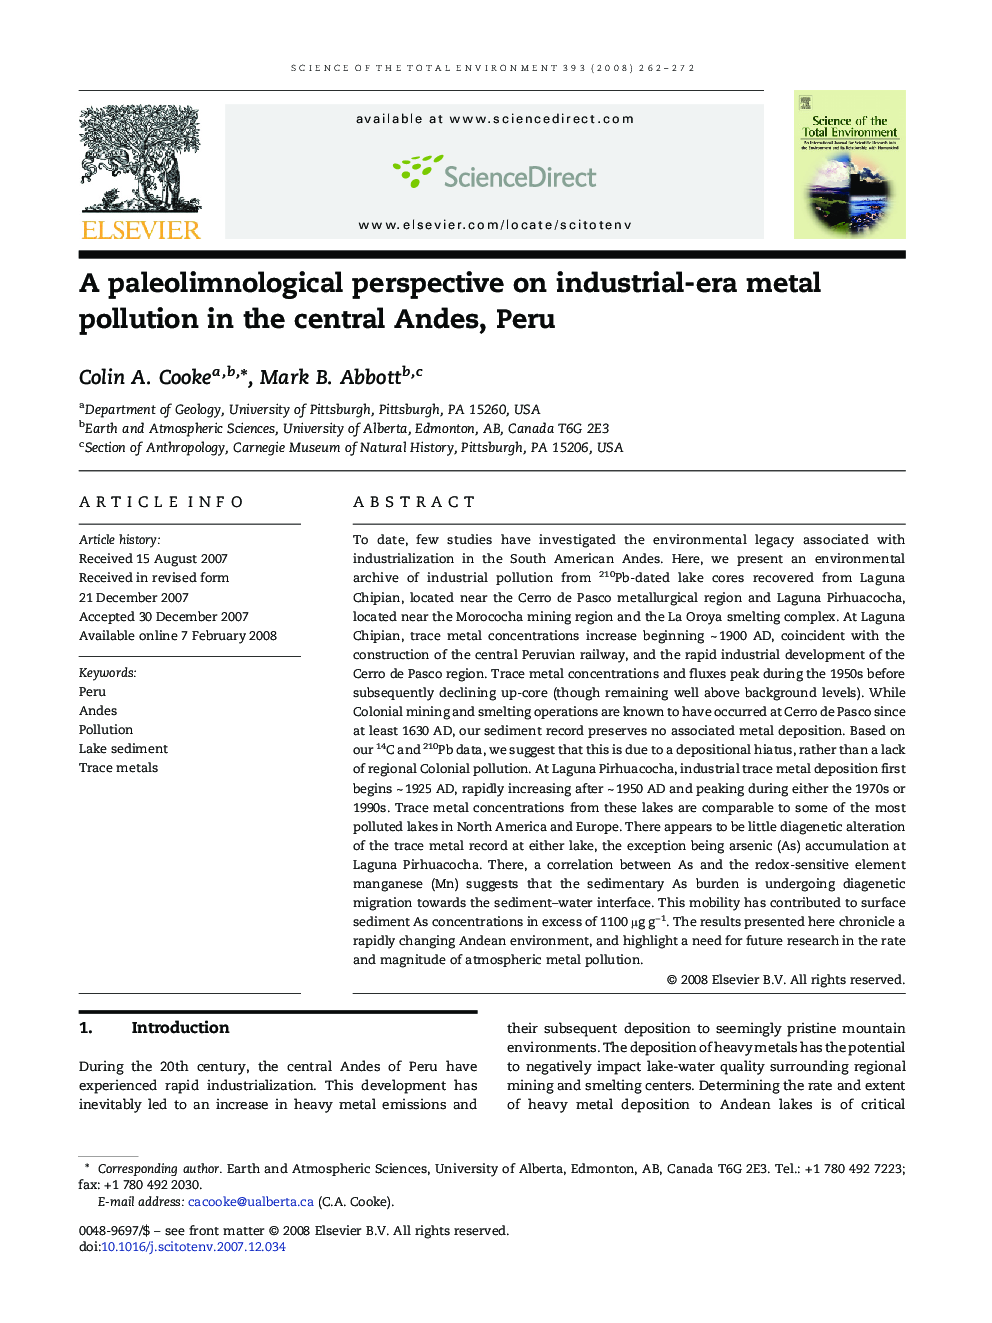 A paleolimnological perspective on industrial-era metal pollution in the central Andes, Peru